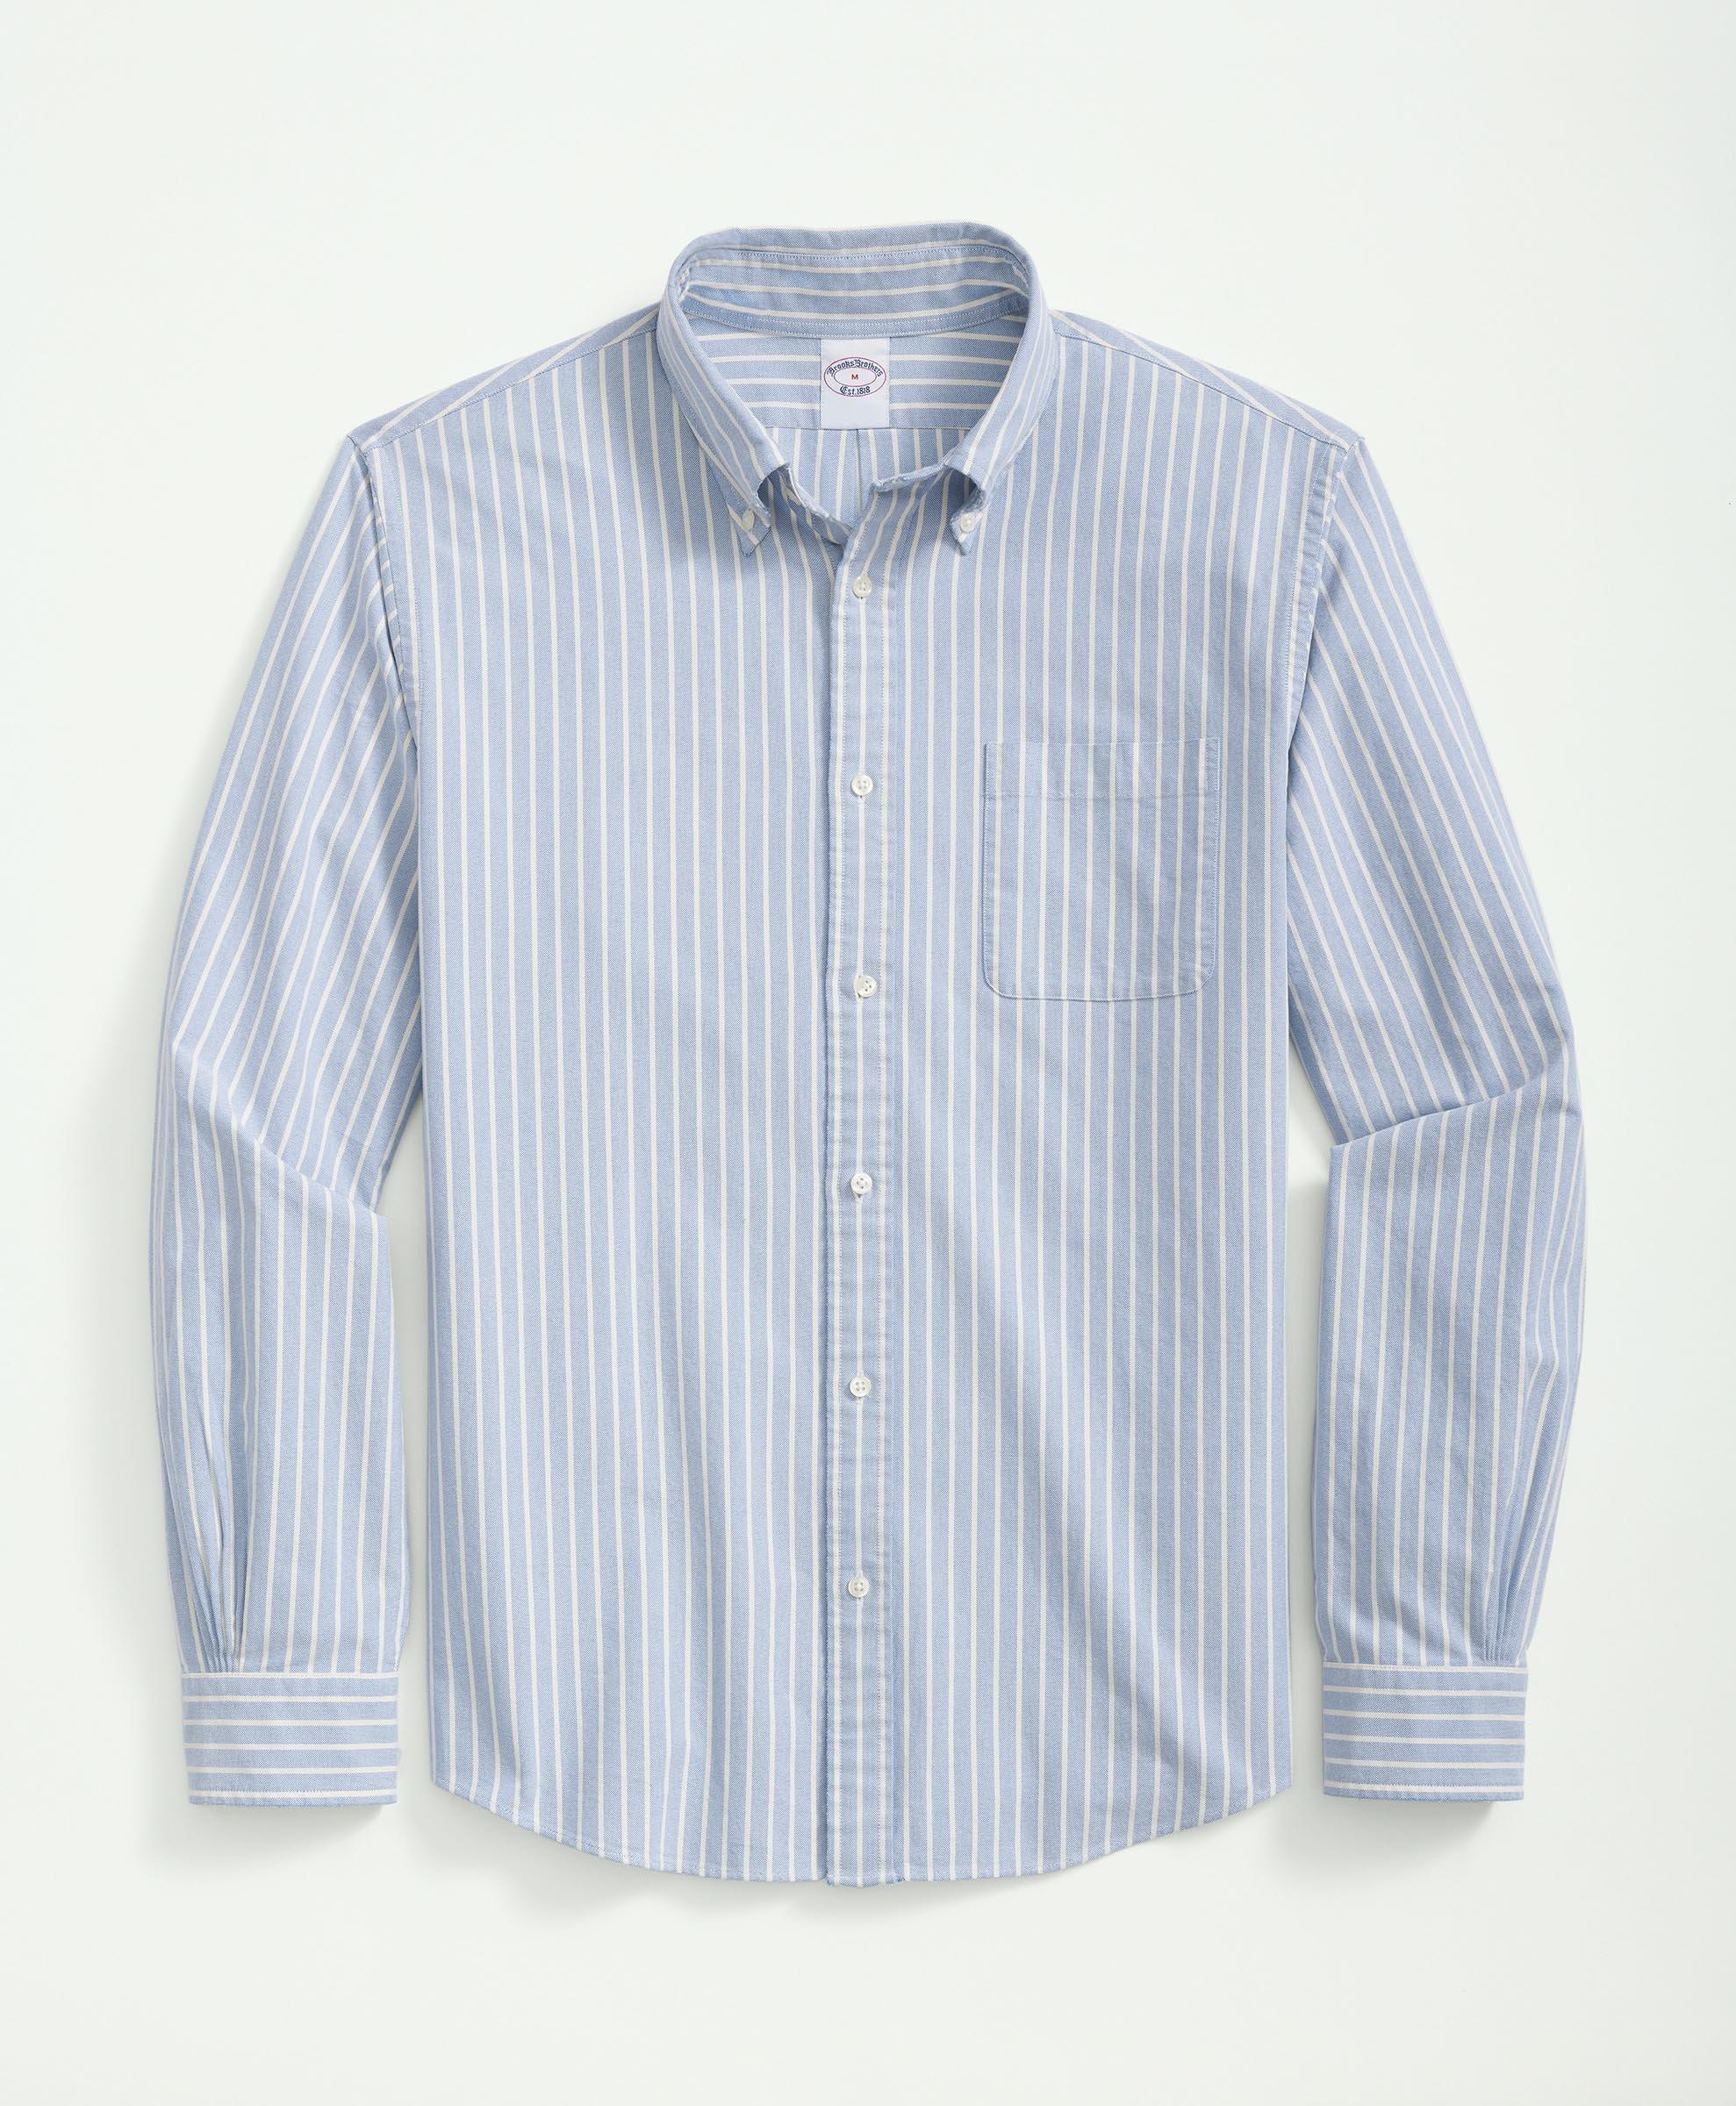 Brooks Brothers The New Friday Oxford Shirt, Archive Striped | Blue | Size Medium